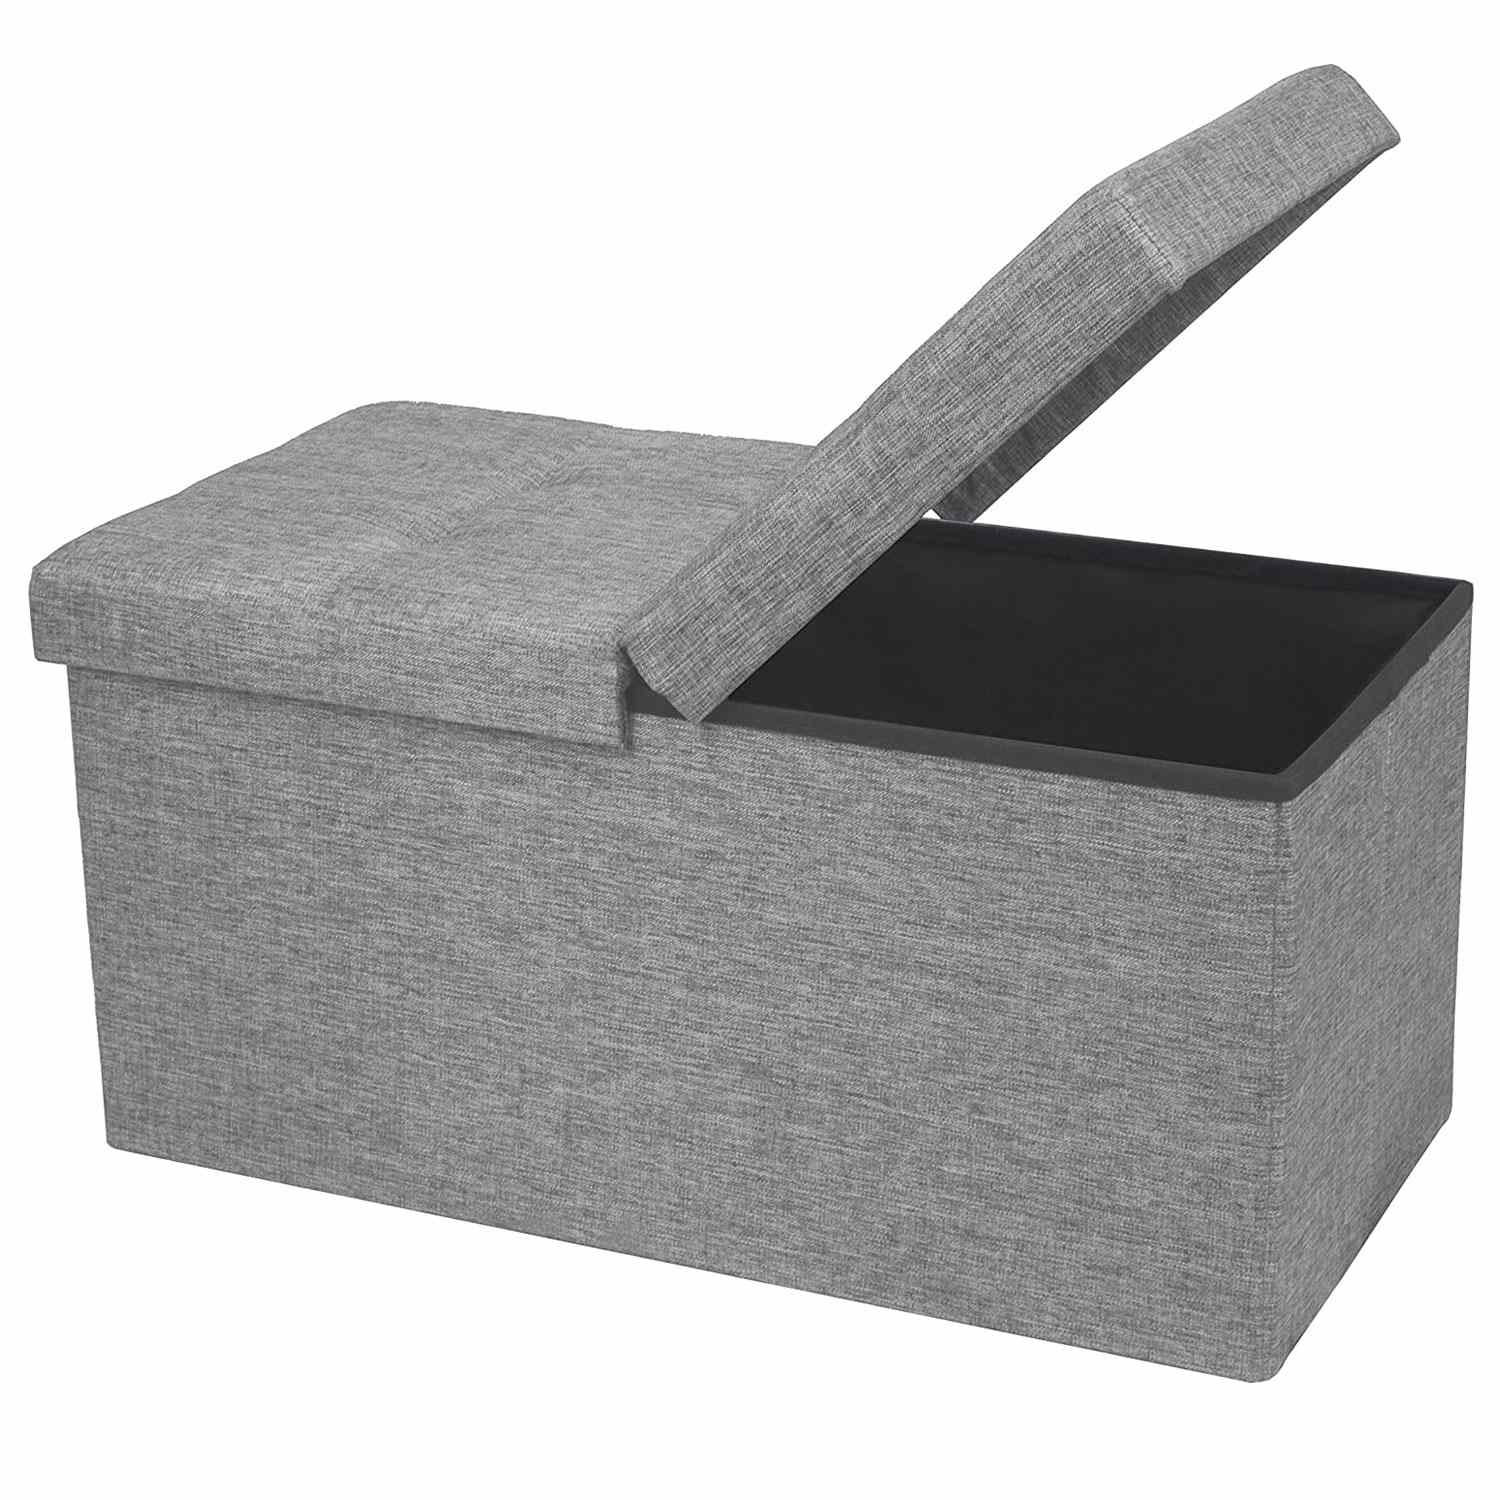 30x15x15 Otto & Ben Folding Toy Box Chest with Smart Lift Top Linen Fabric Ottomans Bench Foot Rest for Bedroom and Living Room Dark Grey